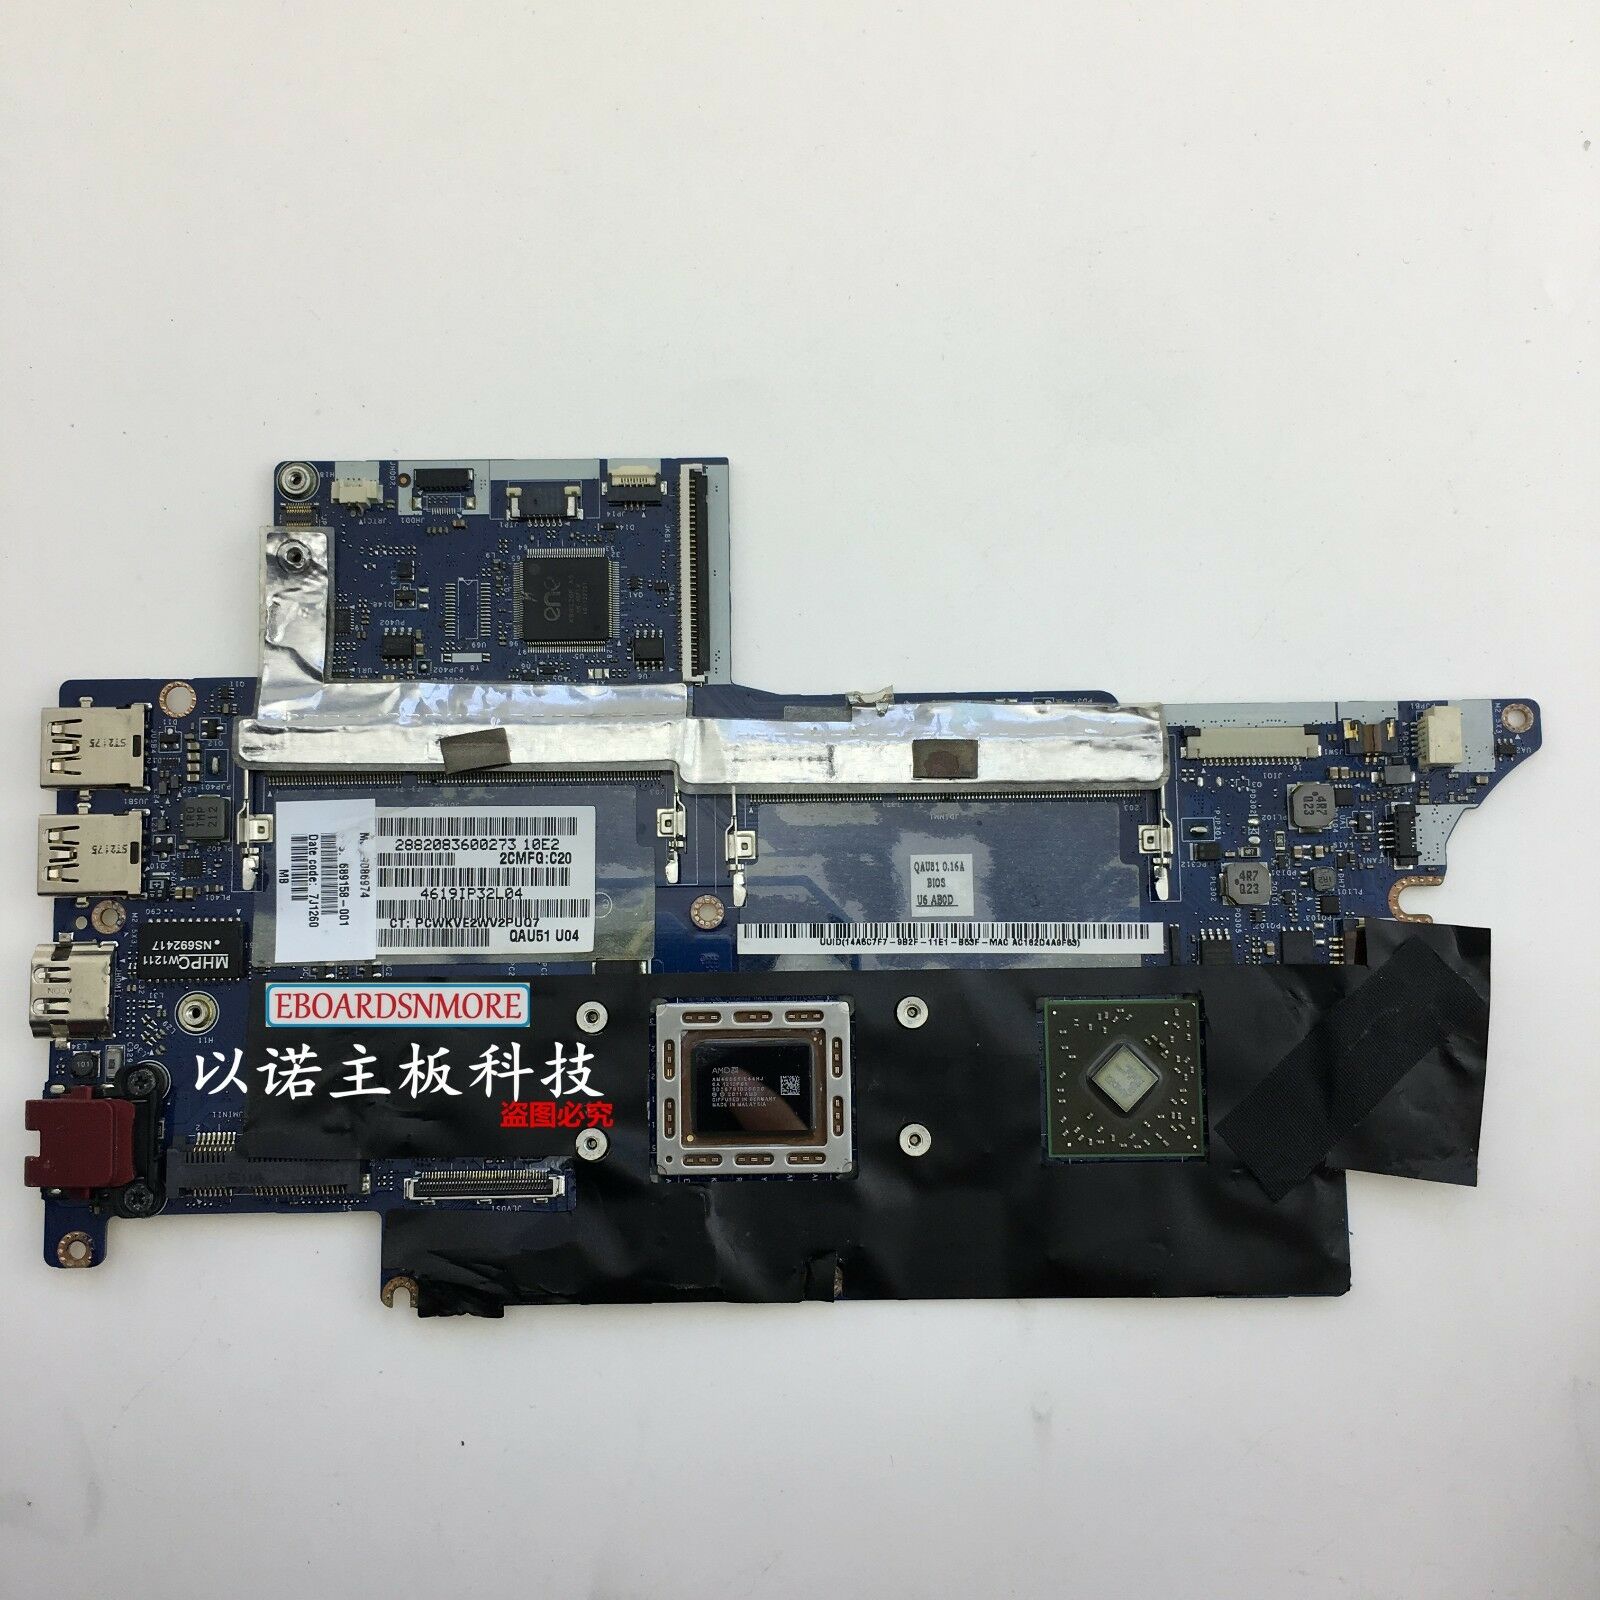 HP laptop mainboard ENVY4 ENVY6 689158-001 laptop motherboard A10-AM4655 Compatible CPU Brand: AMD Fe